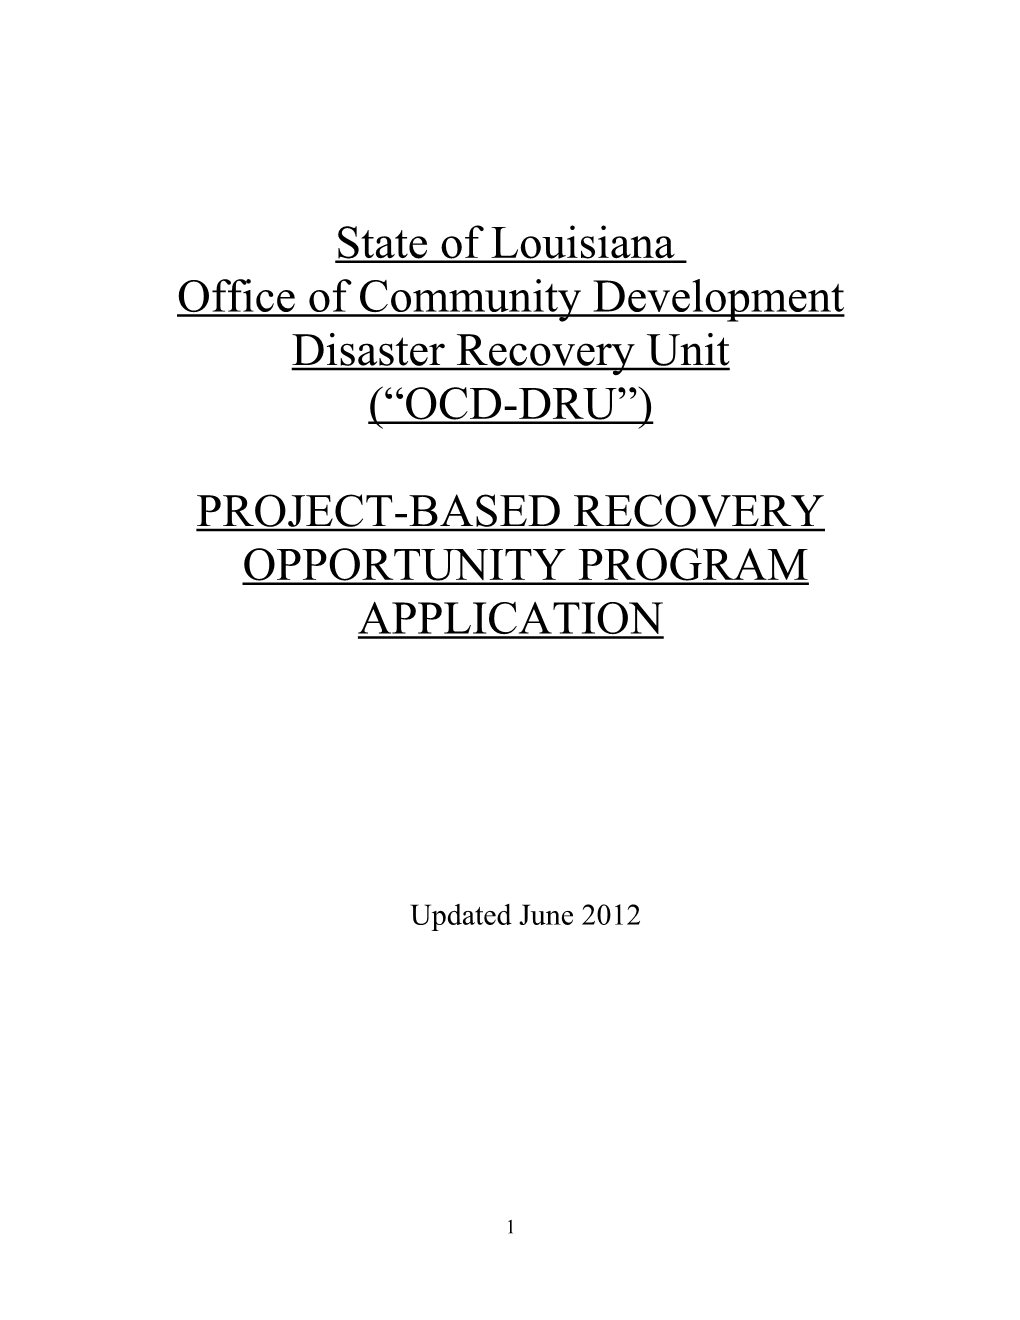 Project-Based Recovery Opportunity Program